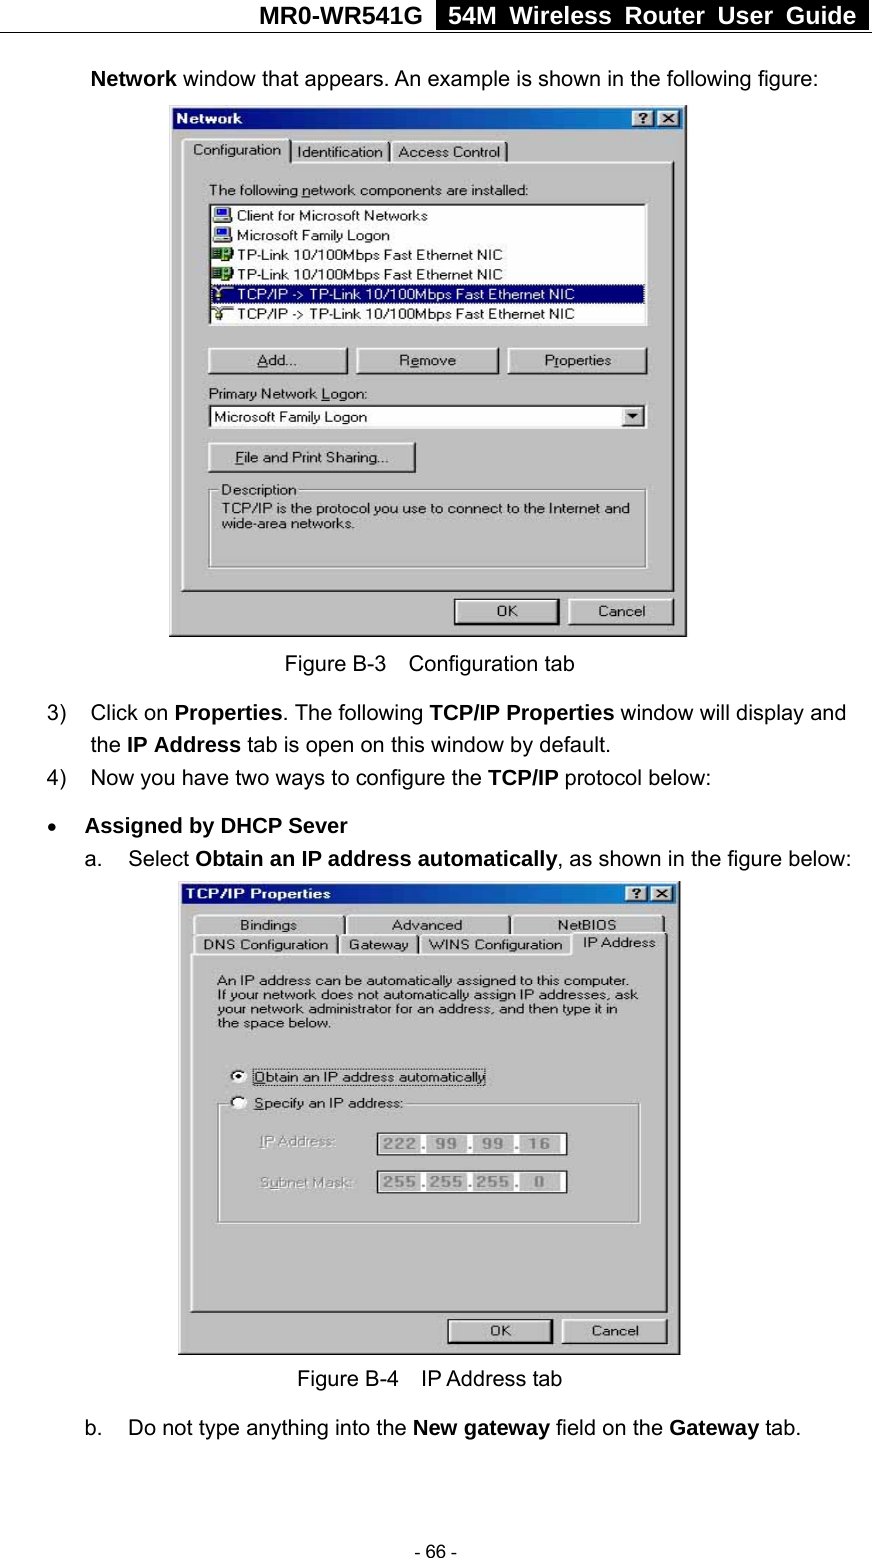 MR0-WR541G   54M Wireless Router User Guide  Network window that appears. An example is shown in the following figure:  Figure B-3  Configuration tab 3) Click on Properties. The following TCP/IP Properties window will display and the IP Address tab is open on this window by default. 4)  Now you have two ways to configure the TCP/IP protocol below: • Assigned by DHCP Sever a. Select Obtain an IP address automatically, as shown in the figure below:  Figure B-4  IP Address tab b.  Do not type anything into the New gateway field on the Gateway tab.    - 66 - 